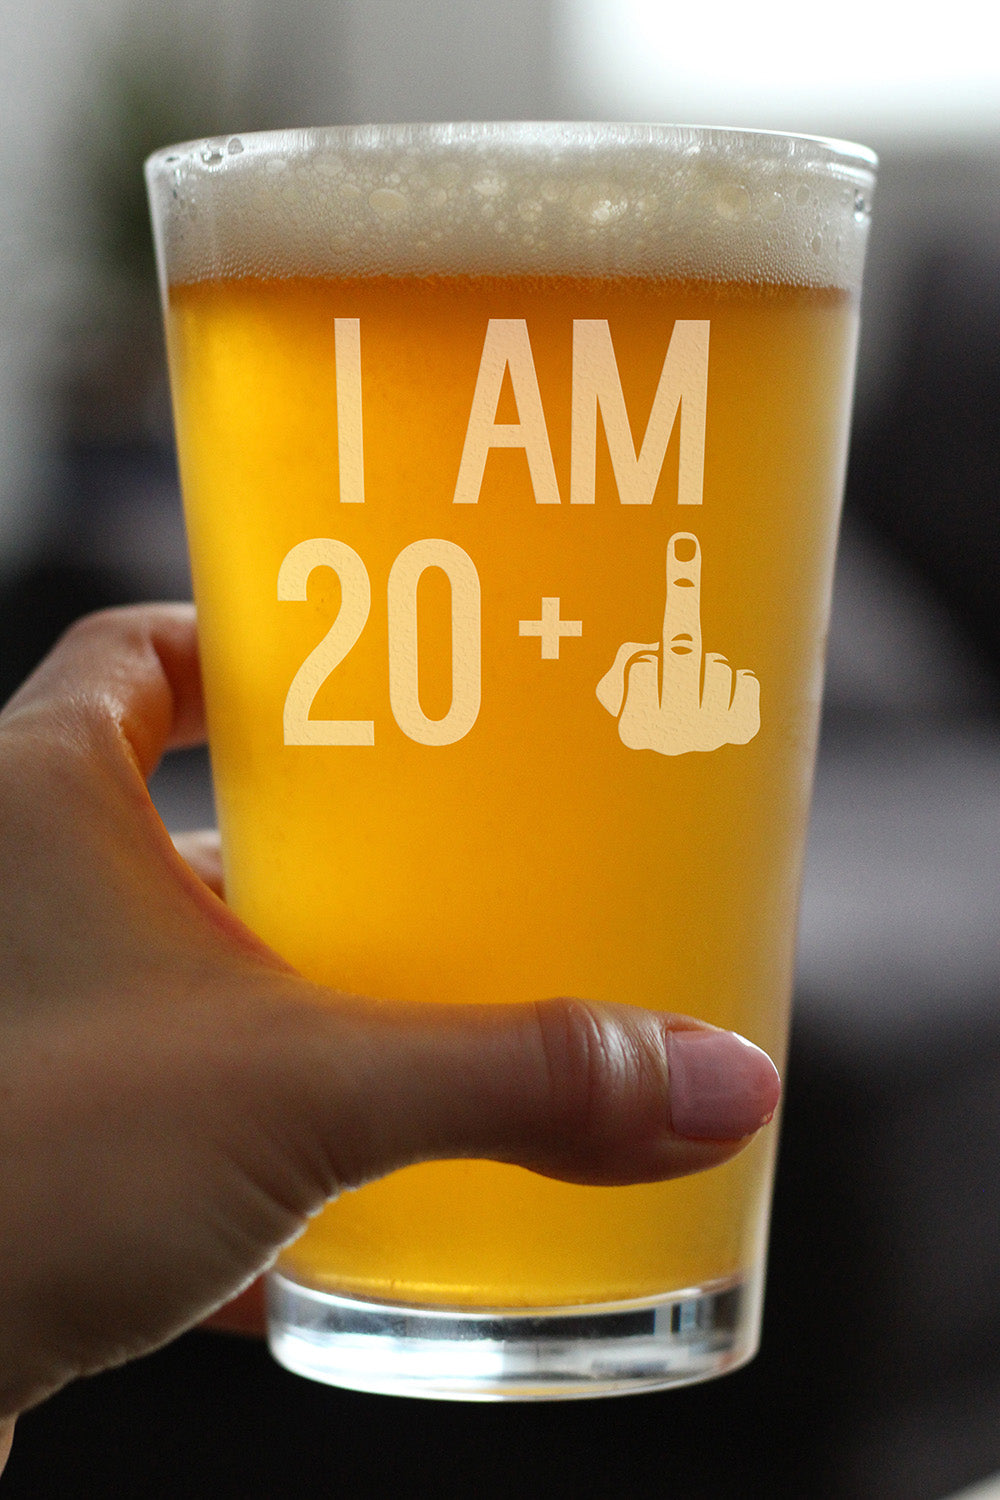 20 + 1 Middle Finger - 16 oz Pint Glass for Beer - Funny 21st Birthday Gifts for Men Turning 21